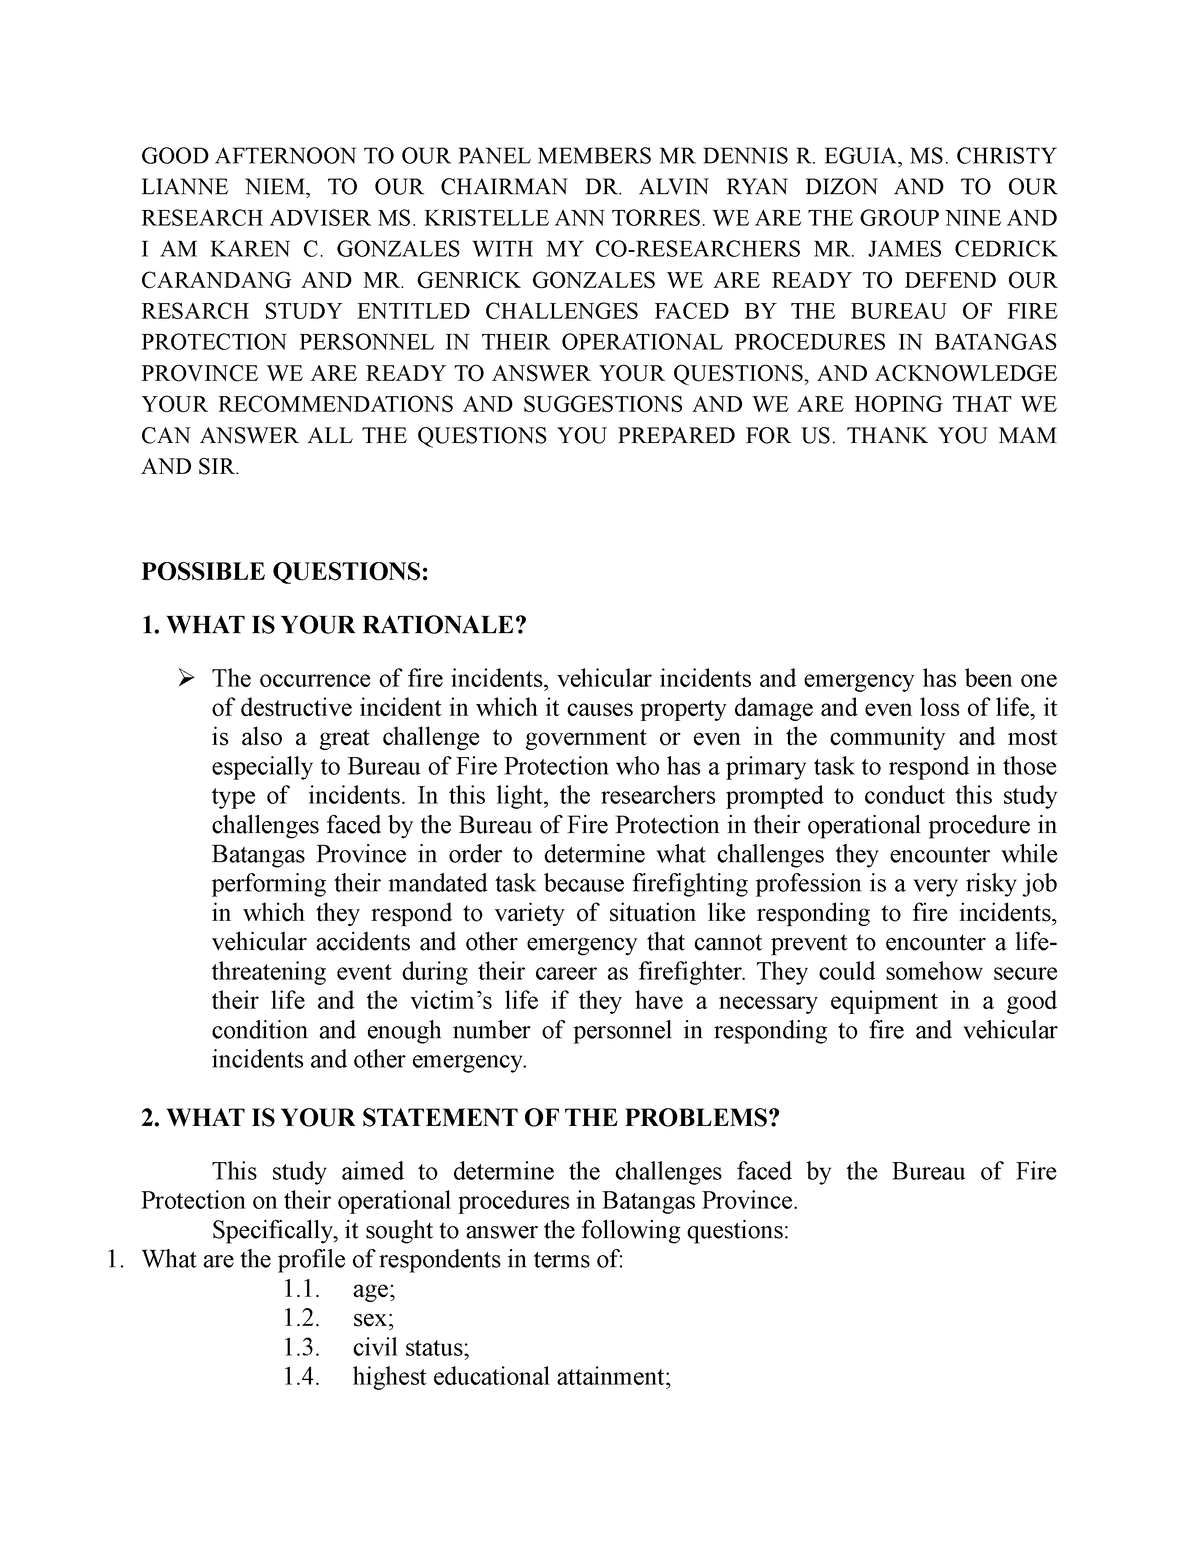 thesis defense questions pdf